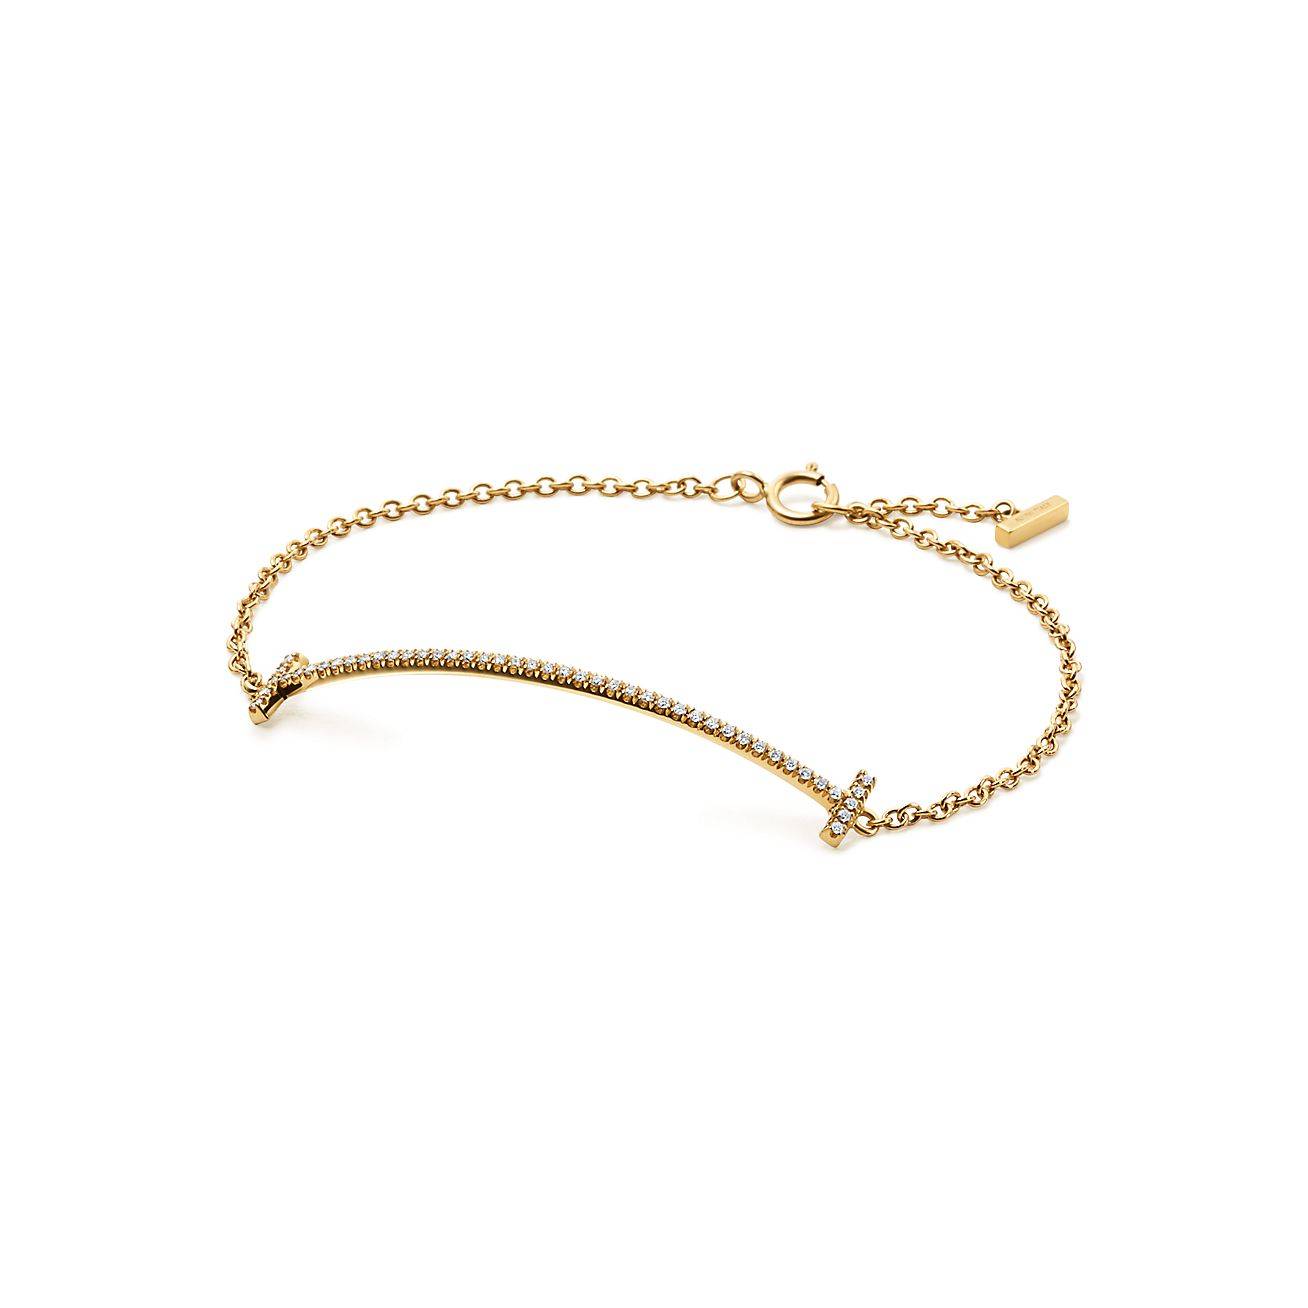 TIFFANY T SMILE BRACELET IN YELLOW GOLD WITH DIAMONDS